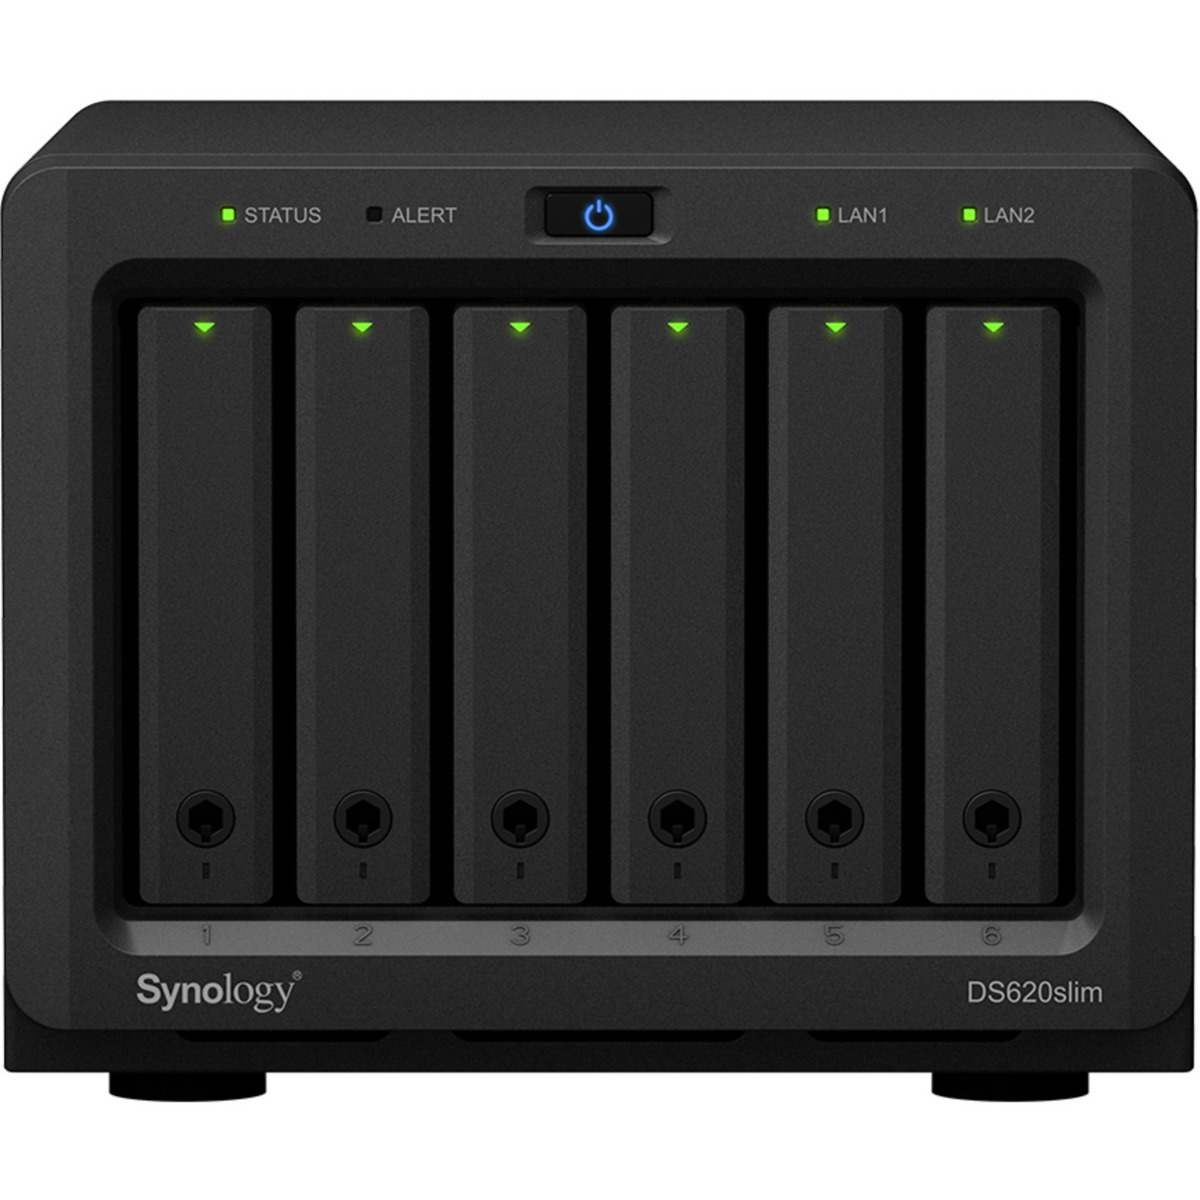 Synology DiskStation DS620slim 4tb 6-Bay Desktop Multimedia / Power User / Business NAS - Network Attached Storage Device 4x1tb Crucial MX500 CT1000MX500SSD1 2.5 560/510MB/s SATA 6Gb/s SSD CONSUMER Class Drives Installed - Burn-In Tested - FREE RAM UPGRADE DiskStation DS620slim